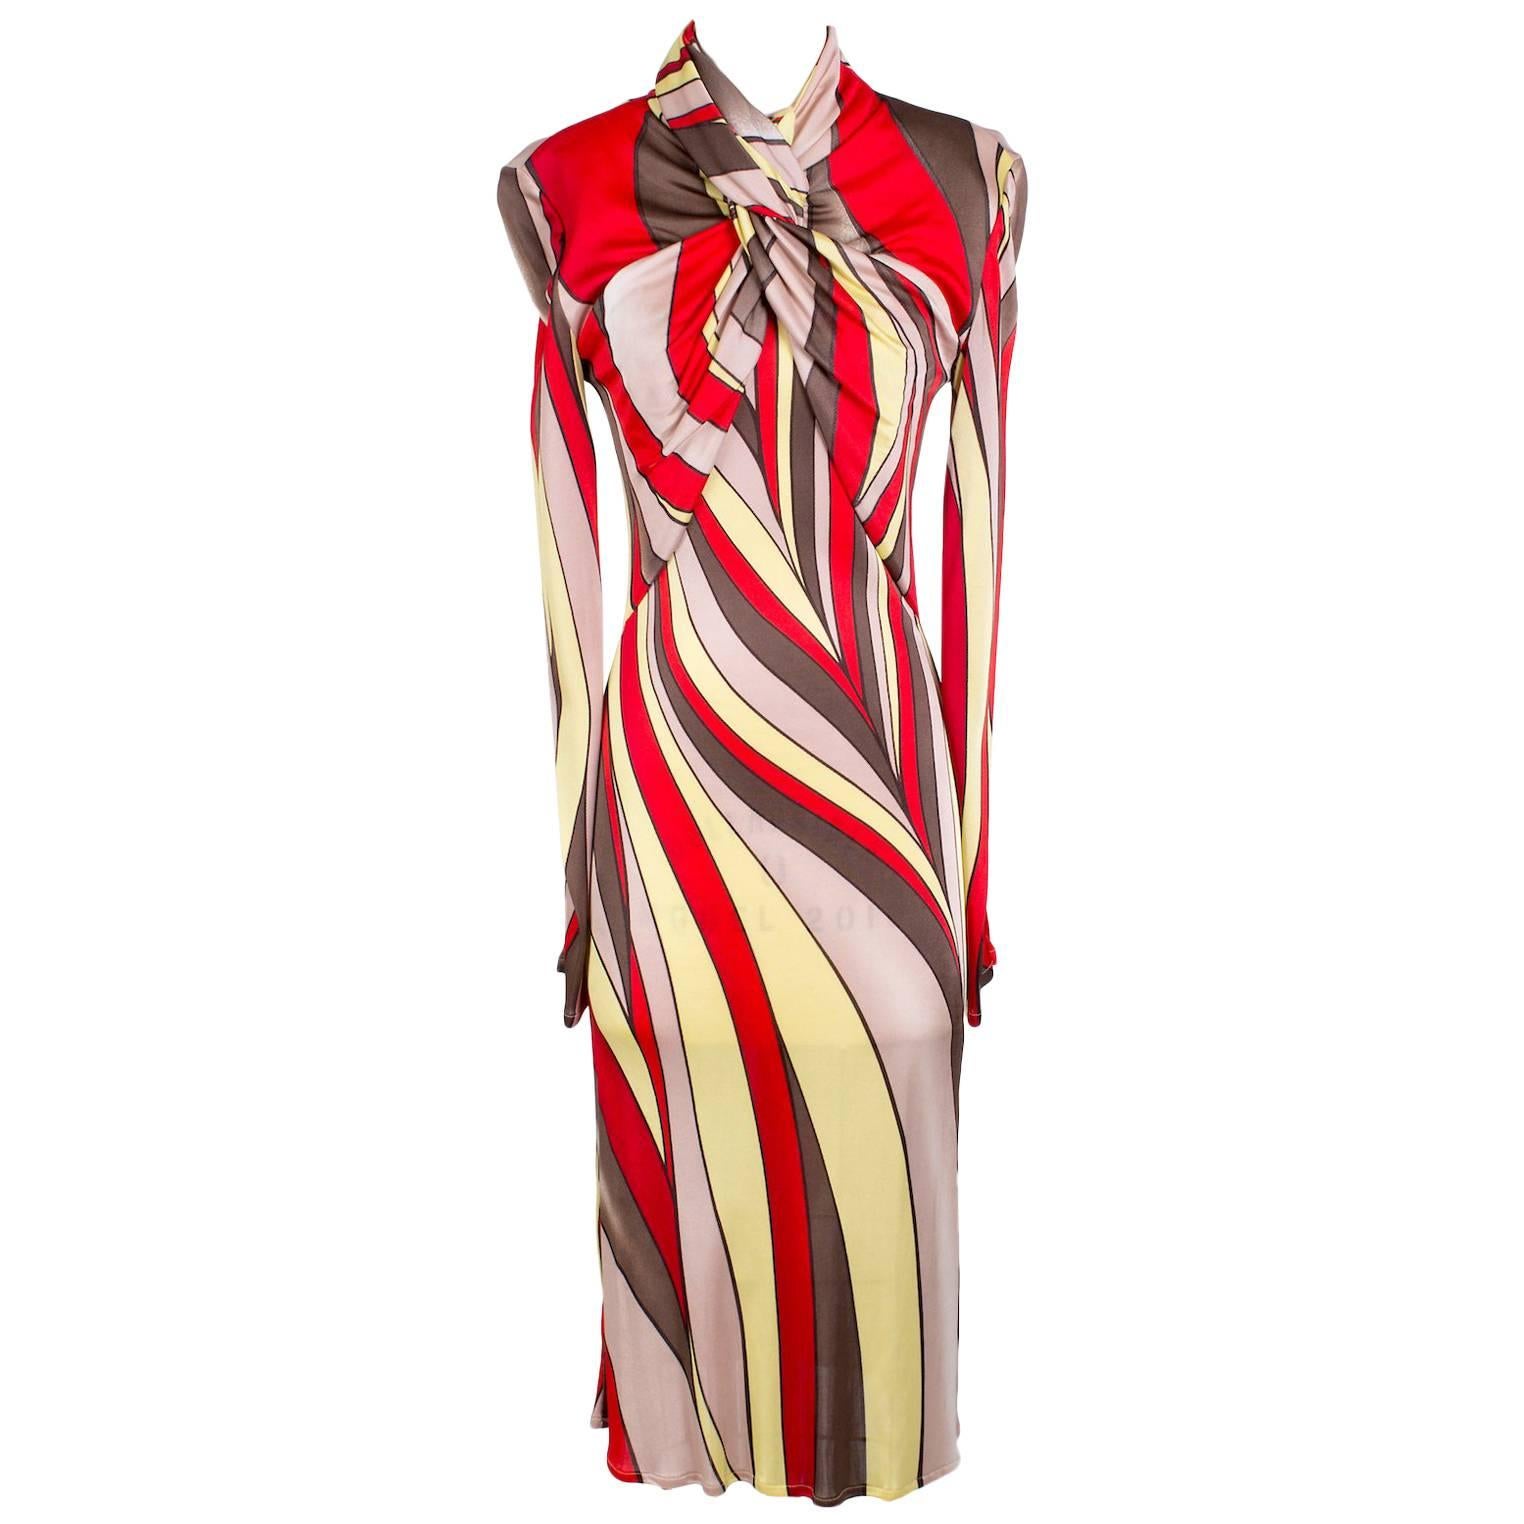 Versace Printed Stretch Jersey Dress with High Twisted Neck circa 1990s